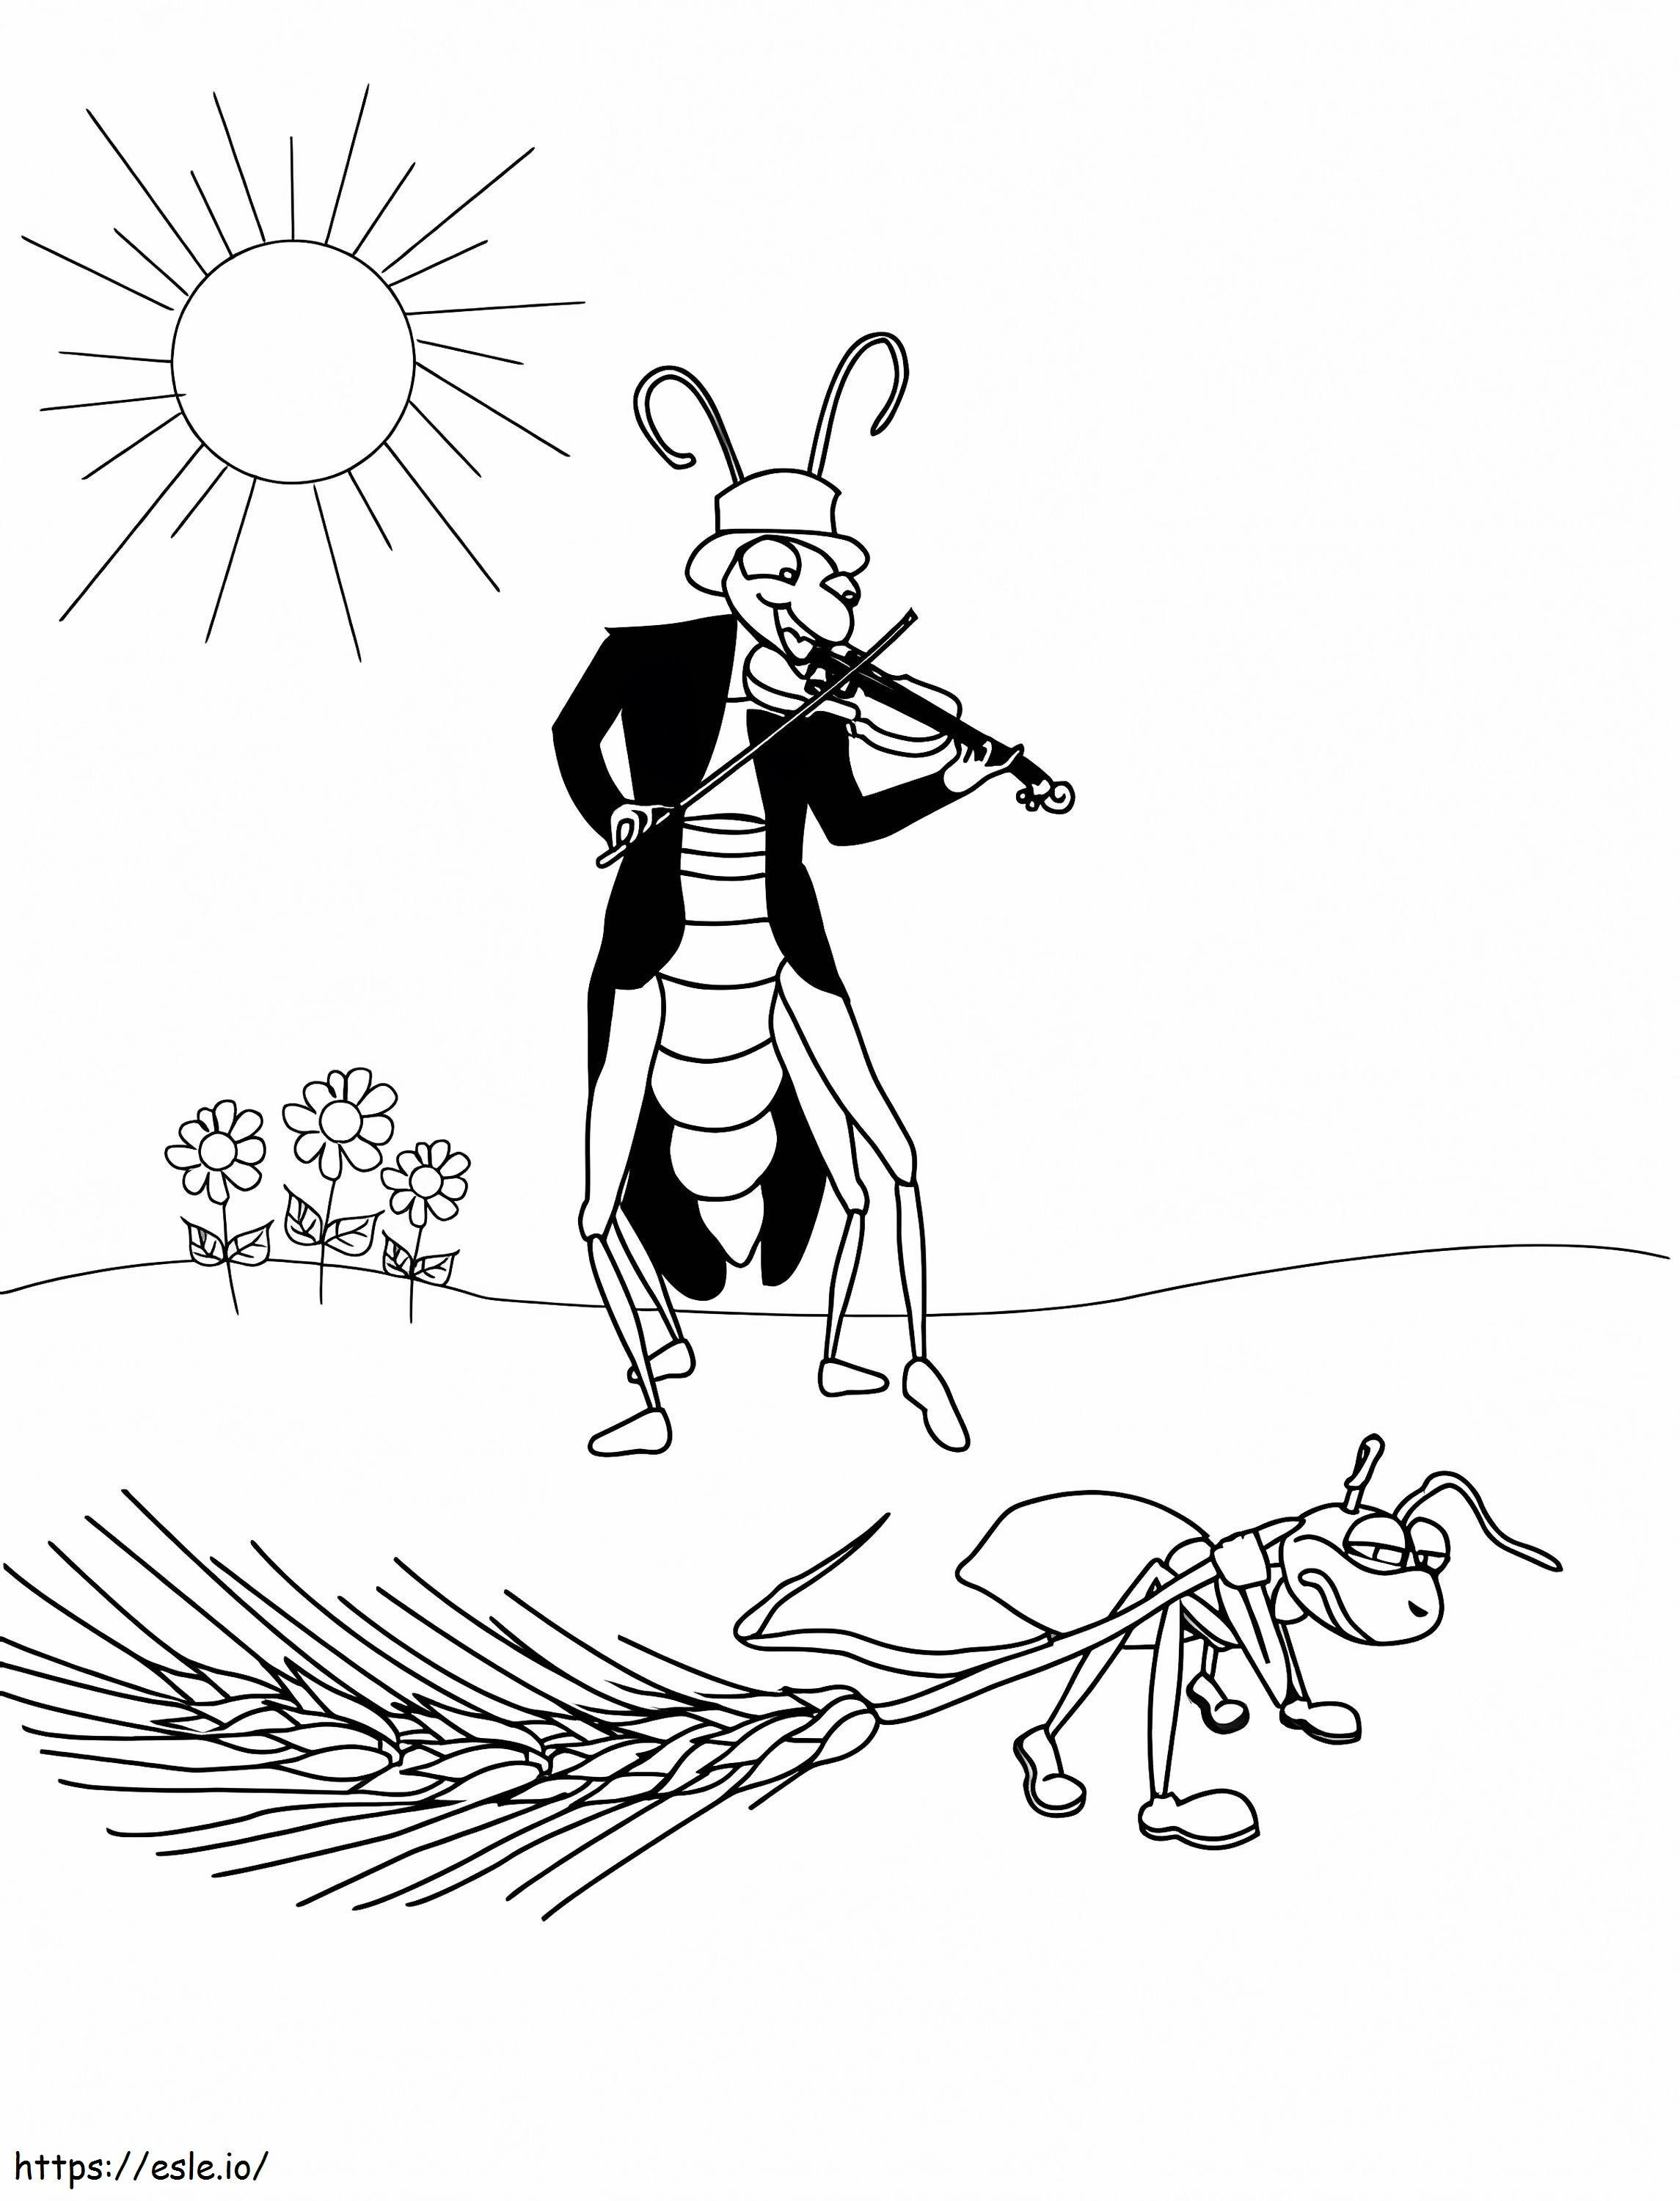 Grasshopper Playing Guitar coloring page